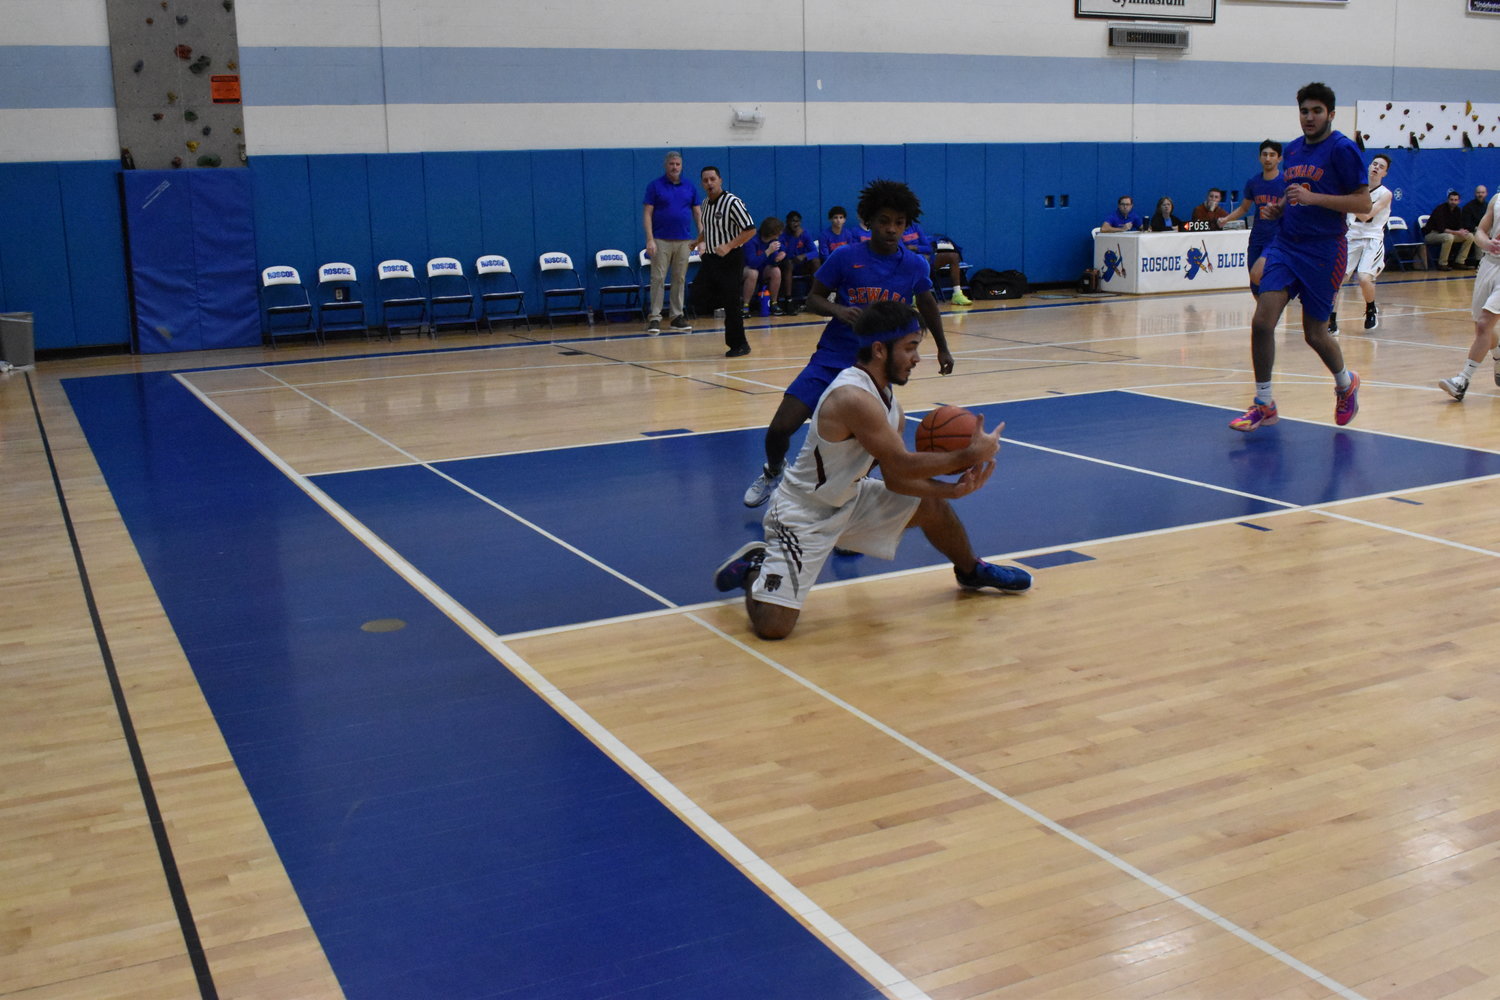 Bobby Staudt hustles for a loose ball against Seward on Saturday afternoon.